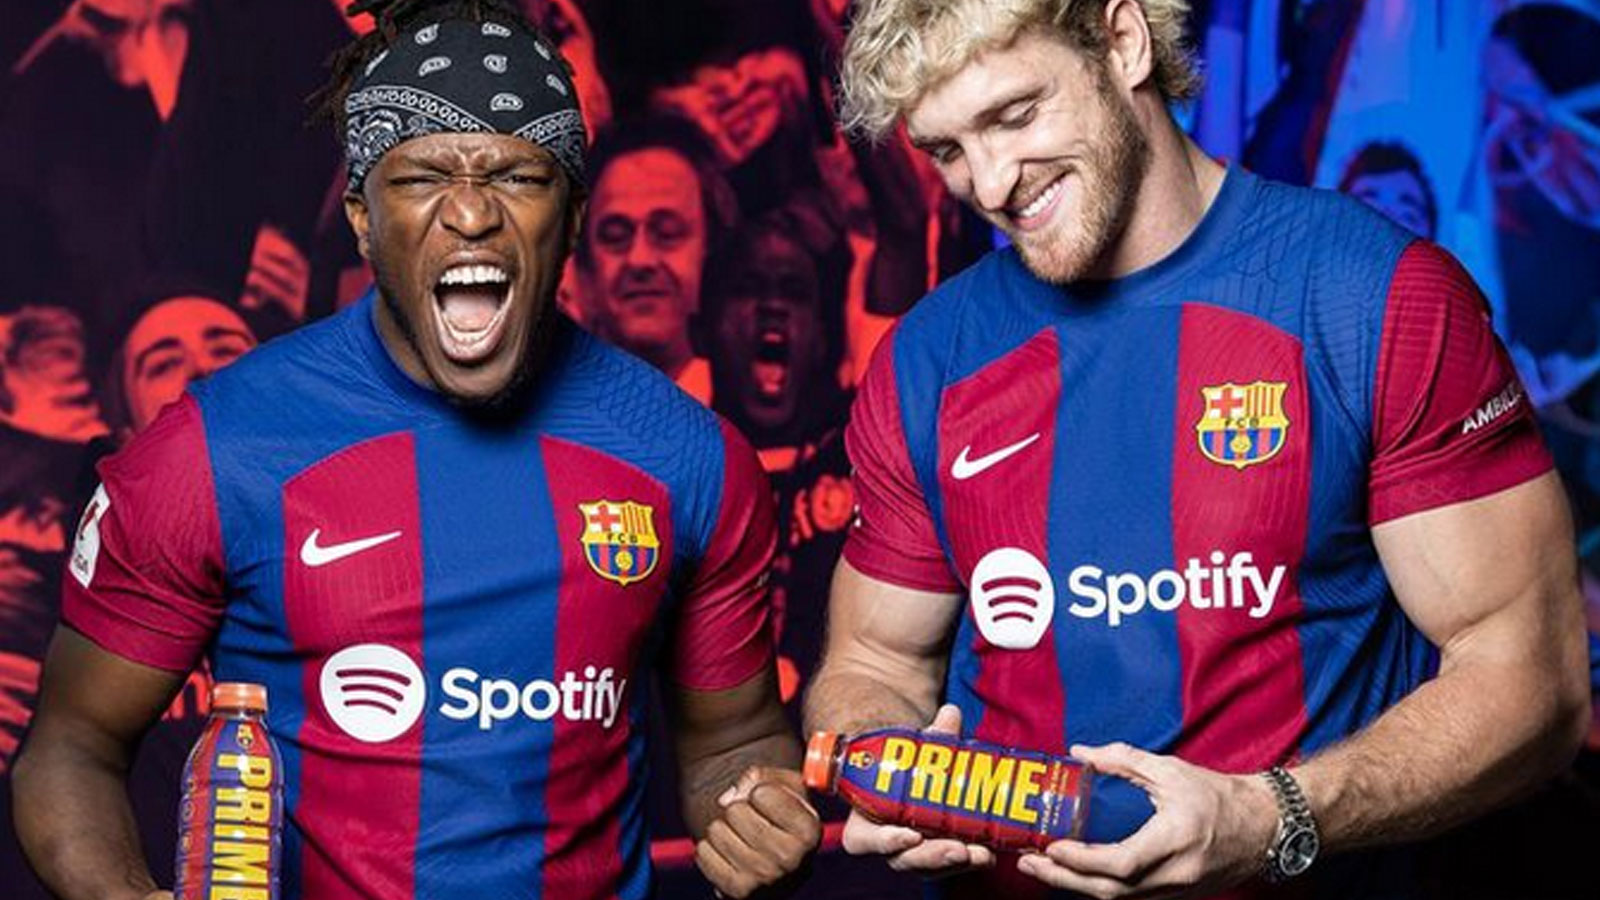 Prime Hydration becomes official hydration sponsor of FC Barcelona ...